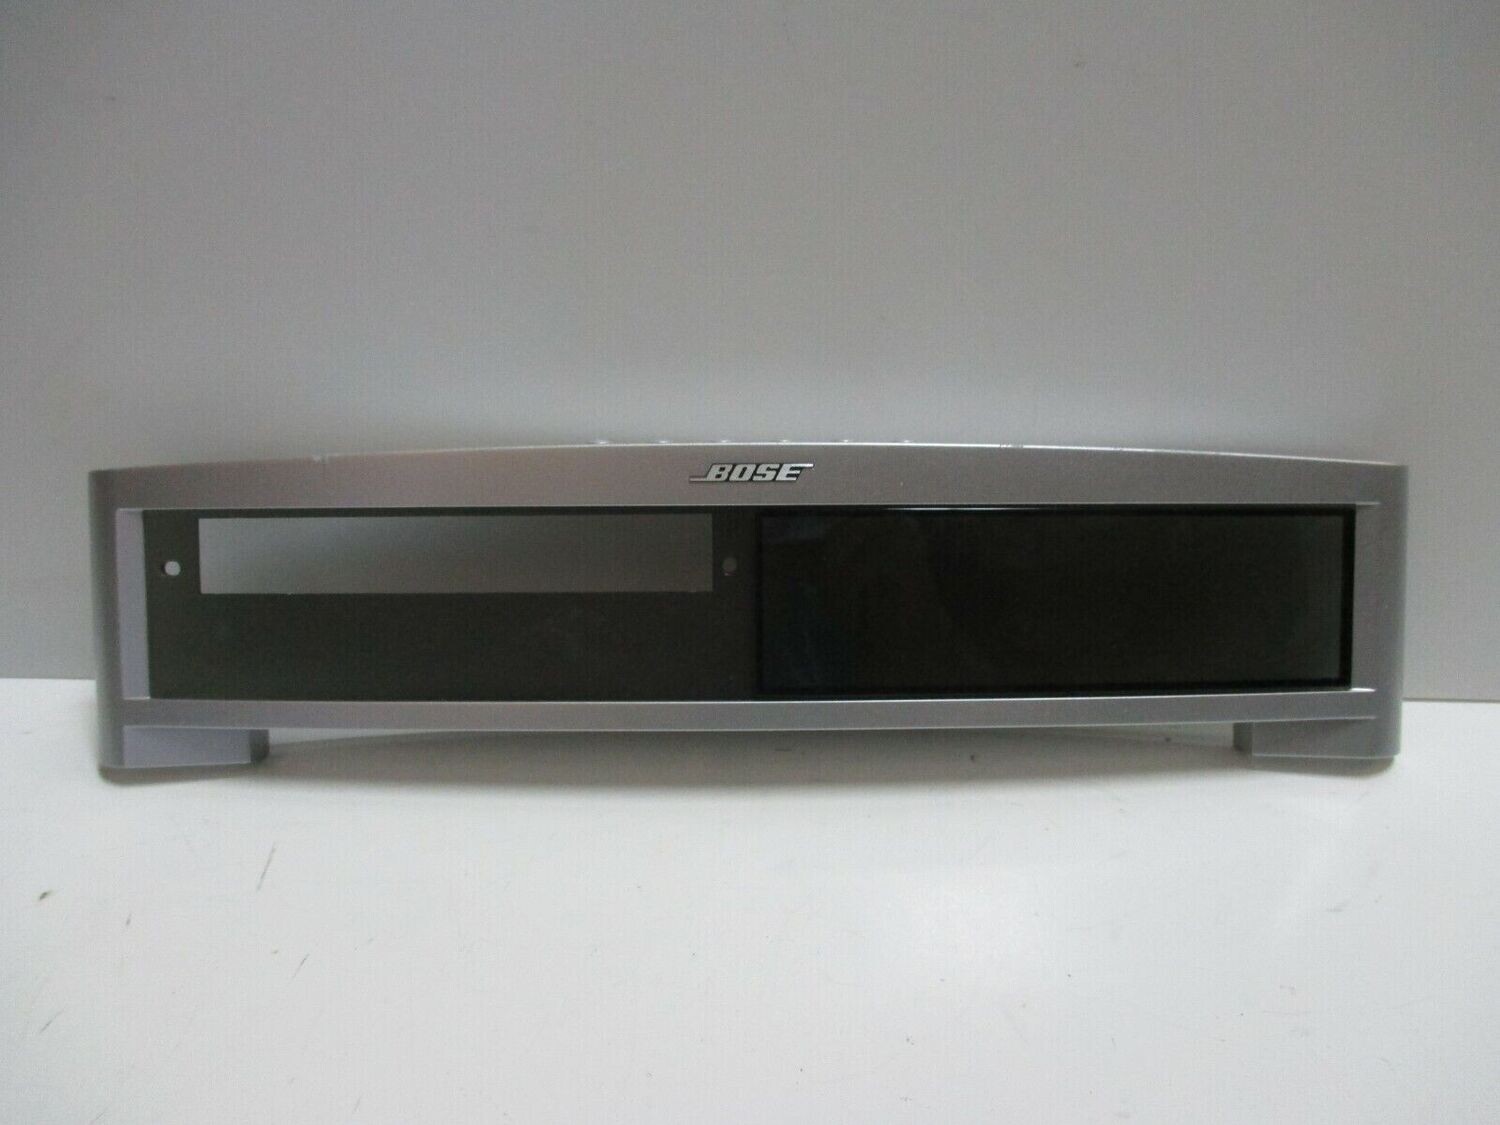 BOSE 321 Series II Front Cover Only